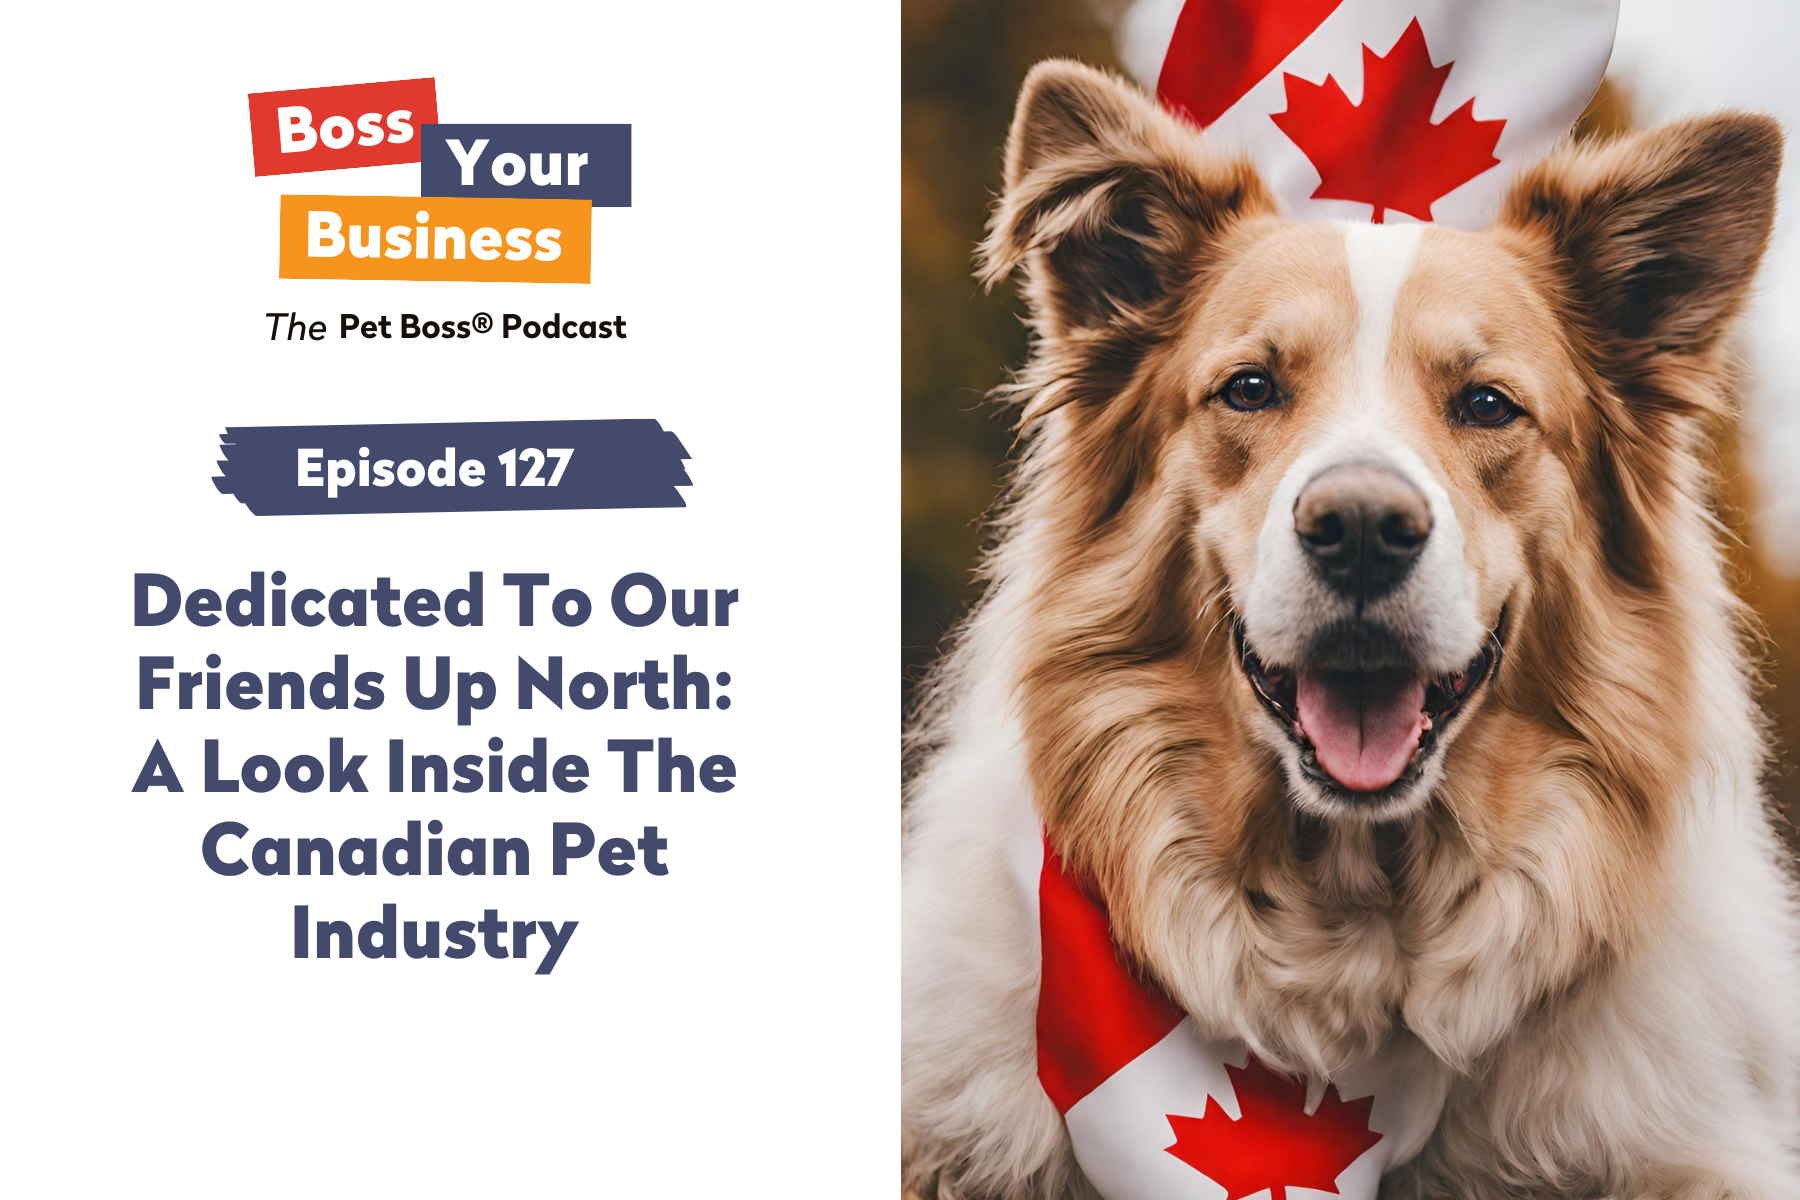 Episode 127 | Dedicated To Our Friends Up North: A Look Inside The Canadian Pet Industry